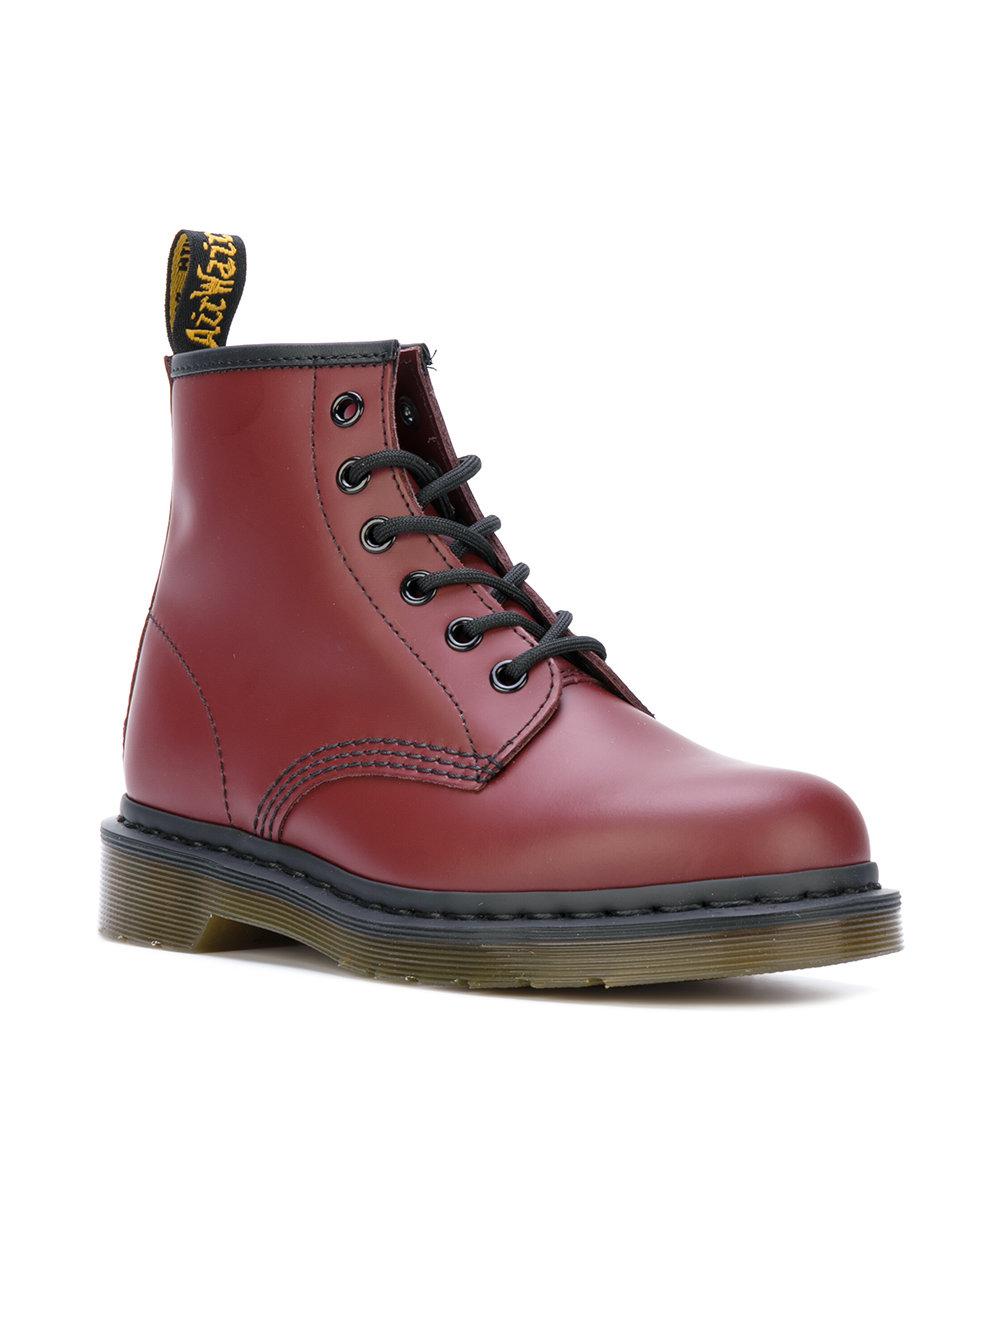 Dr. Martens Leather 101 Smooth Boots in Red - Lyst